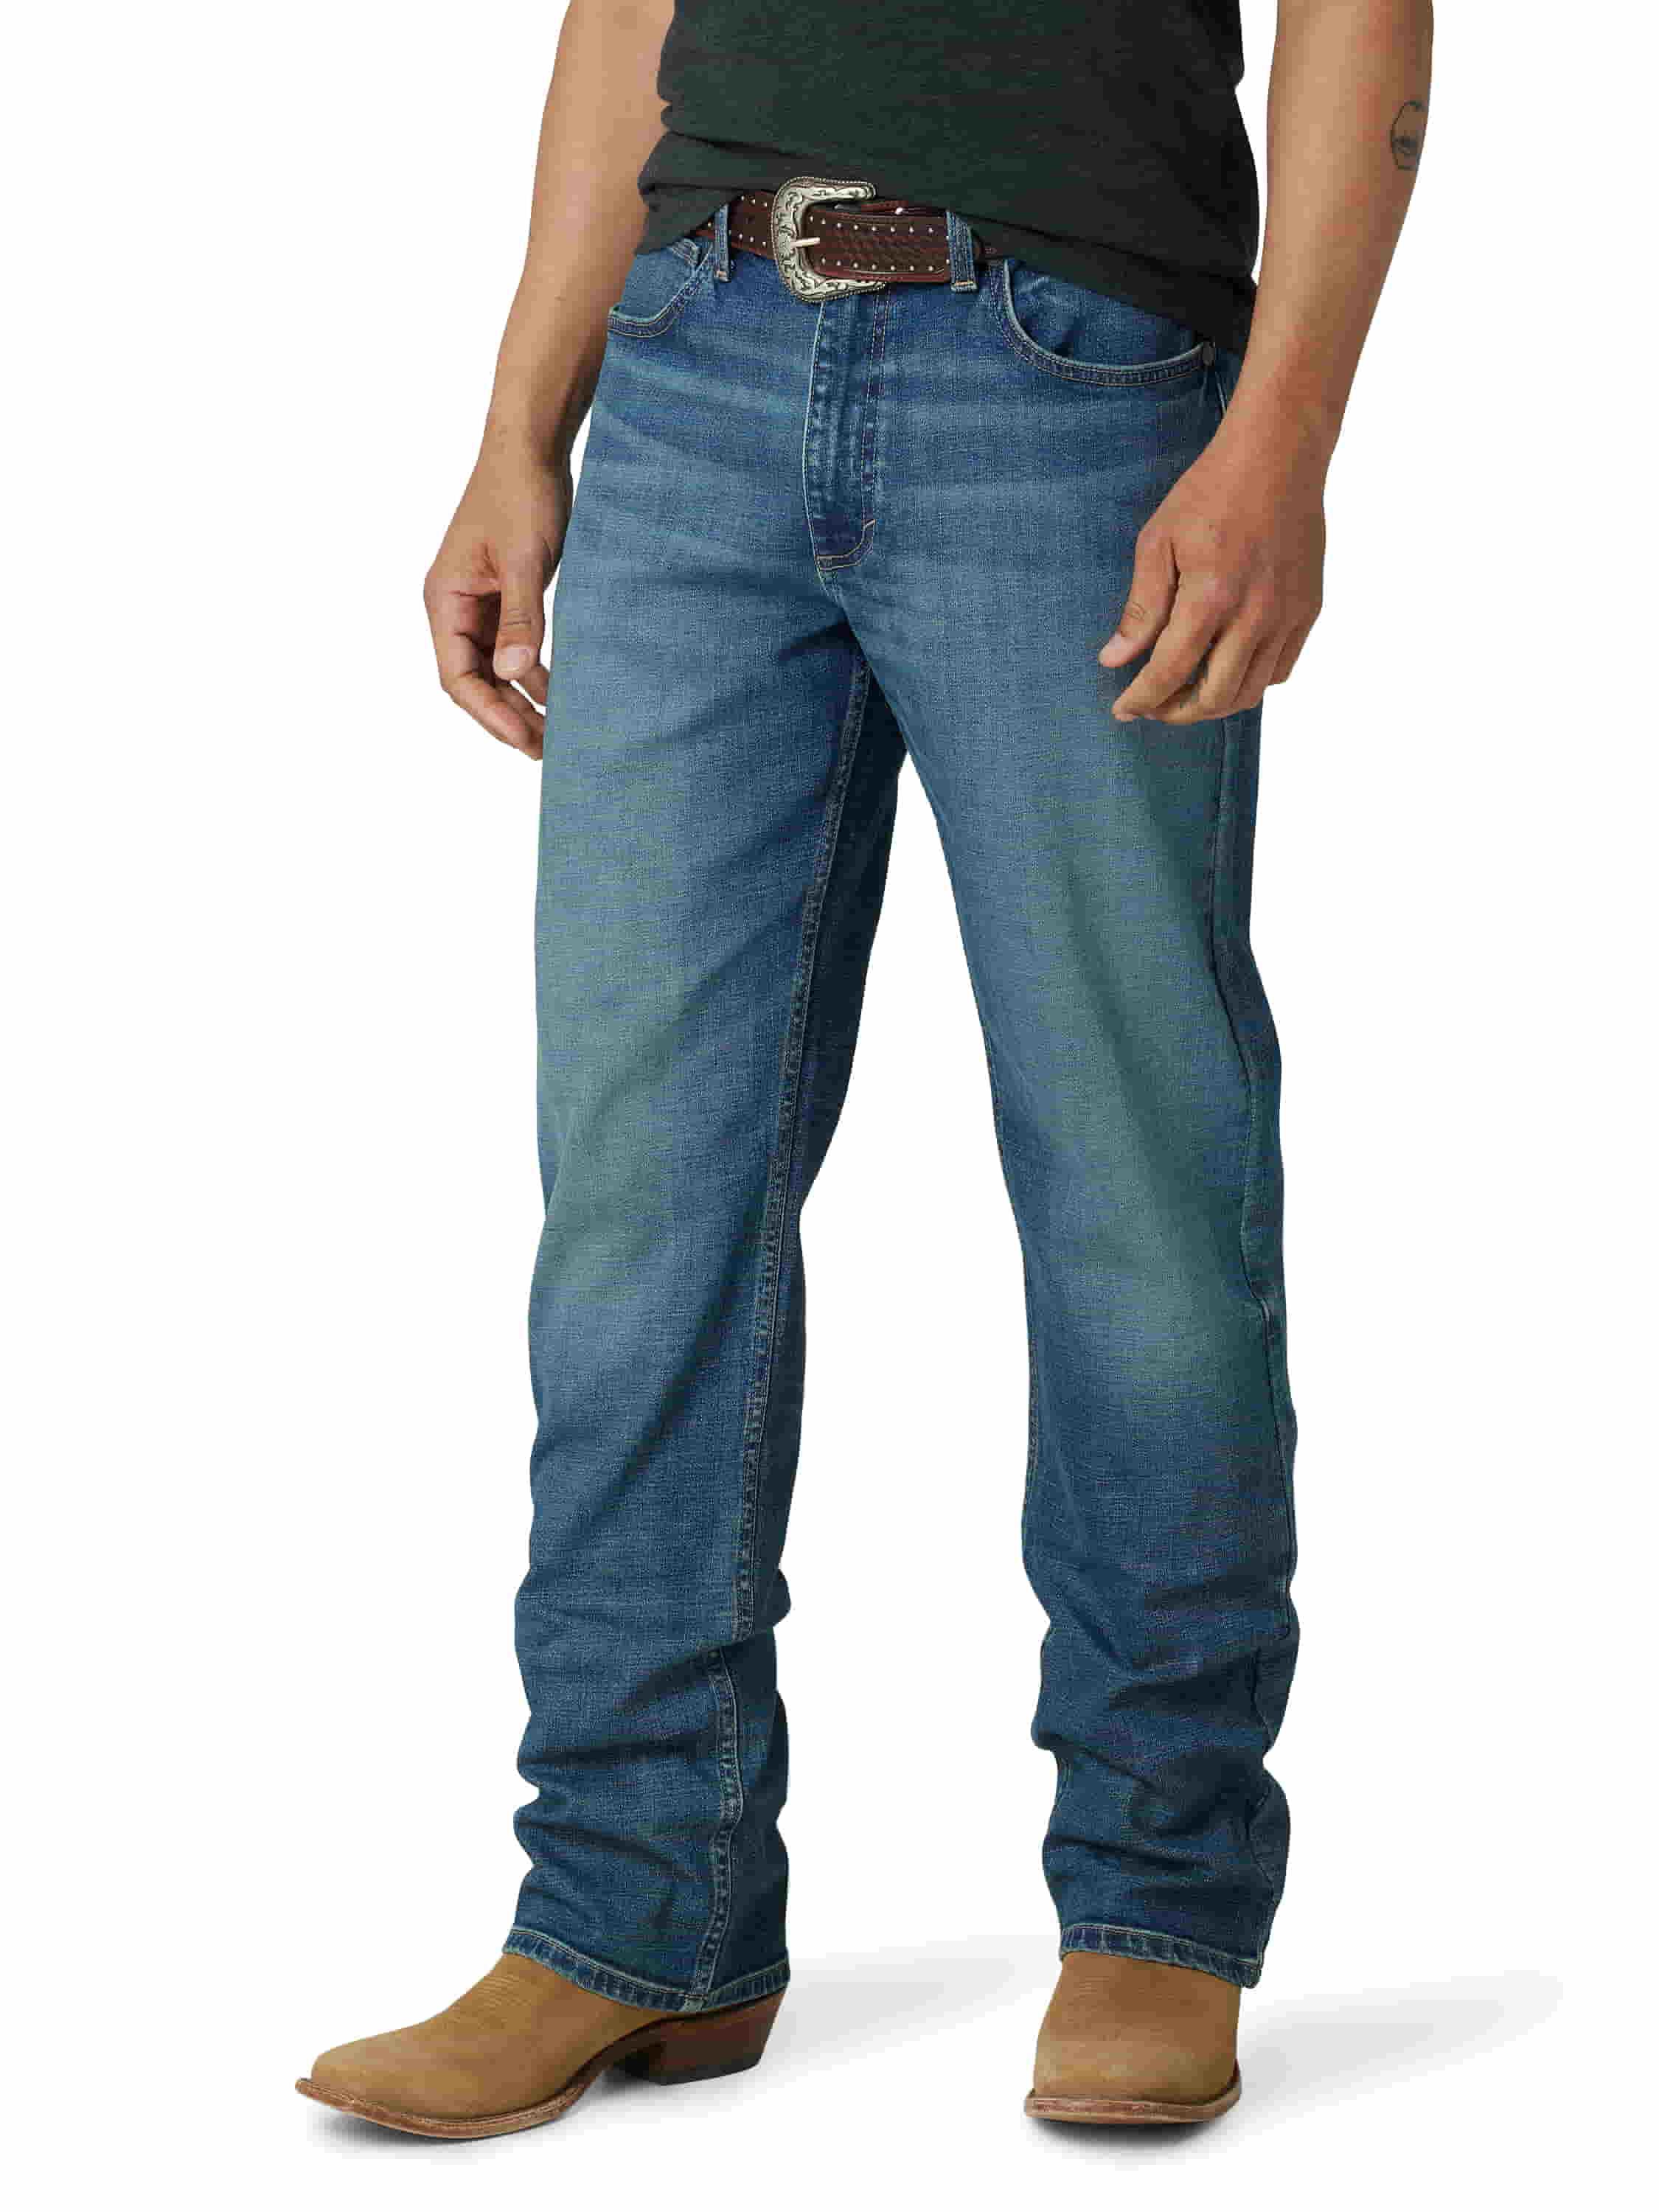 20X 33 Extreme Relaxed Fit Medium Wash Men's Jeans by Wrangler